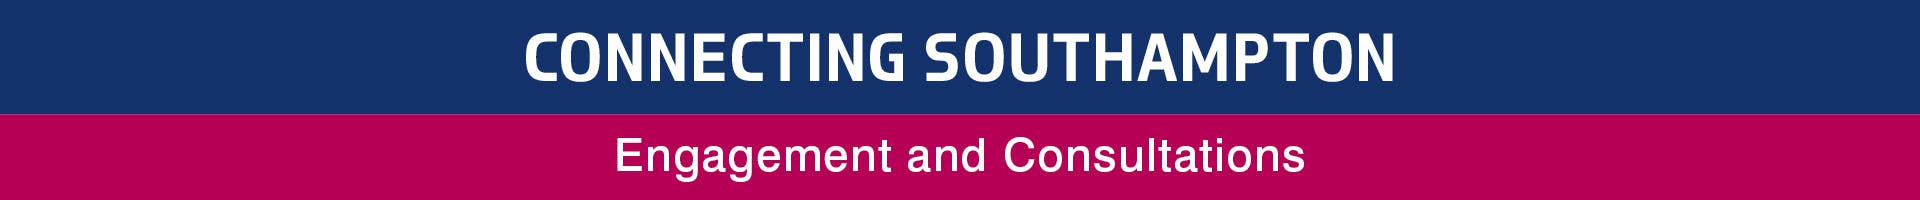 Connecting Southampton Engagement and Consultations